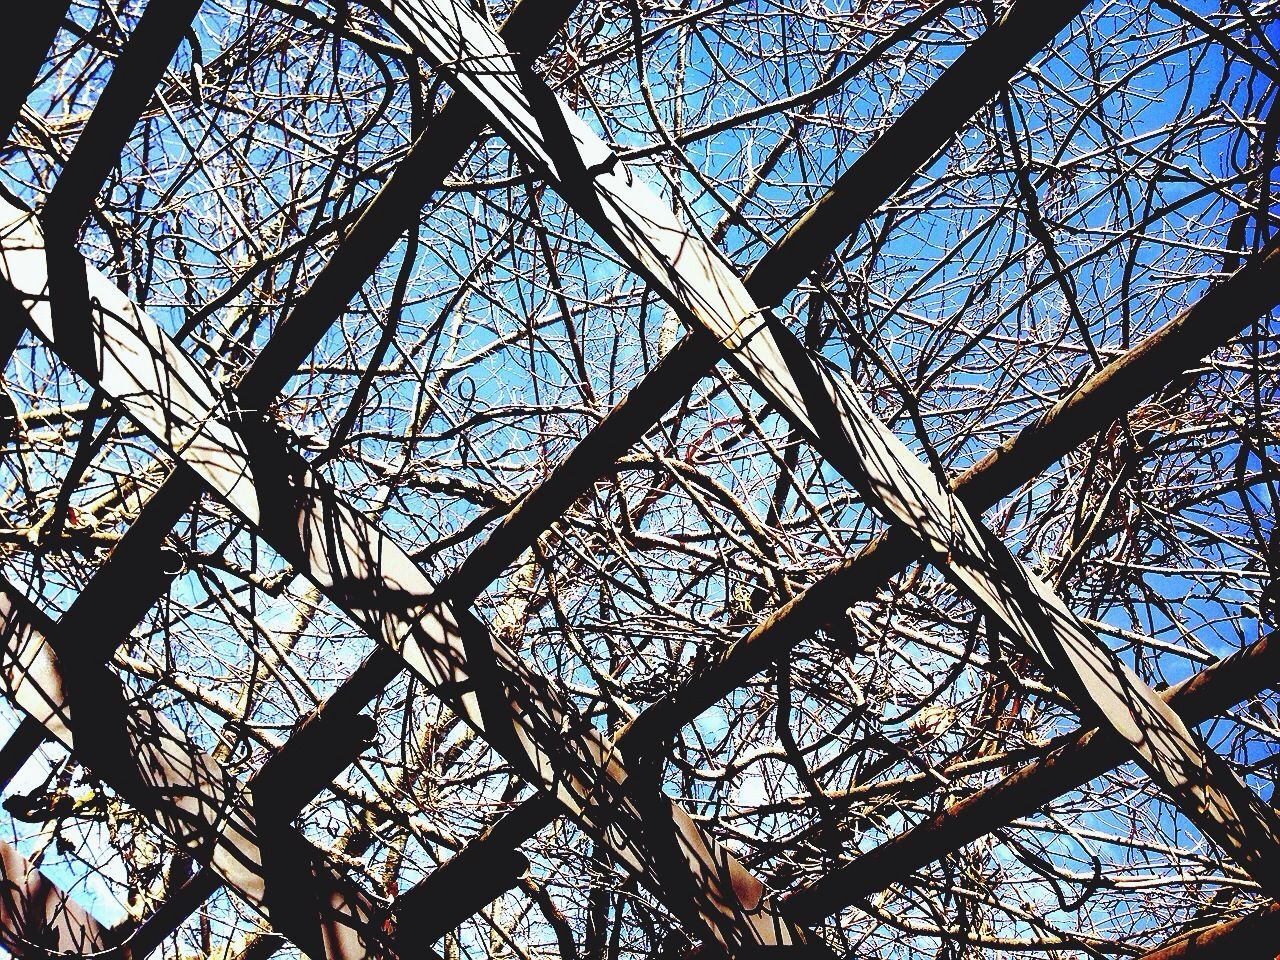 low angle view, tree, bare tree, branch, sky, built structure, full frame, day, backgrounds, directly below, no people, clear sky, outdoors, nature, pattern, metal, architecture, blue, complexity, part of